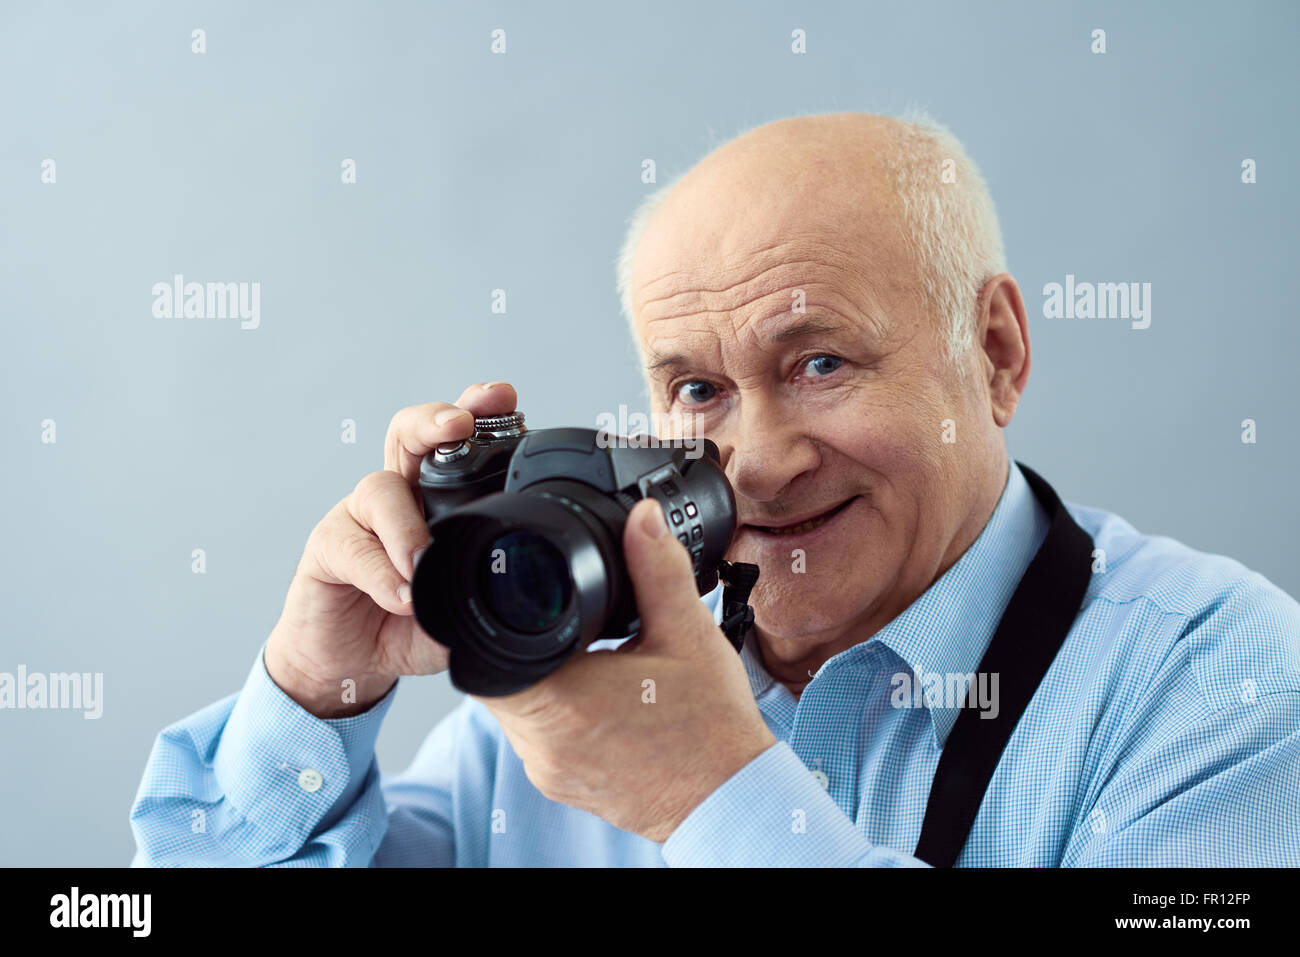 Running successful photography business. Stock Photo